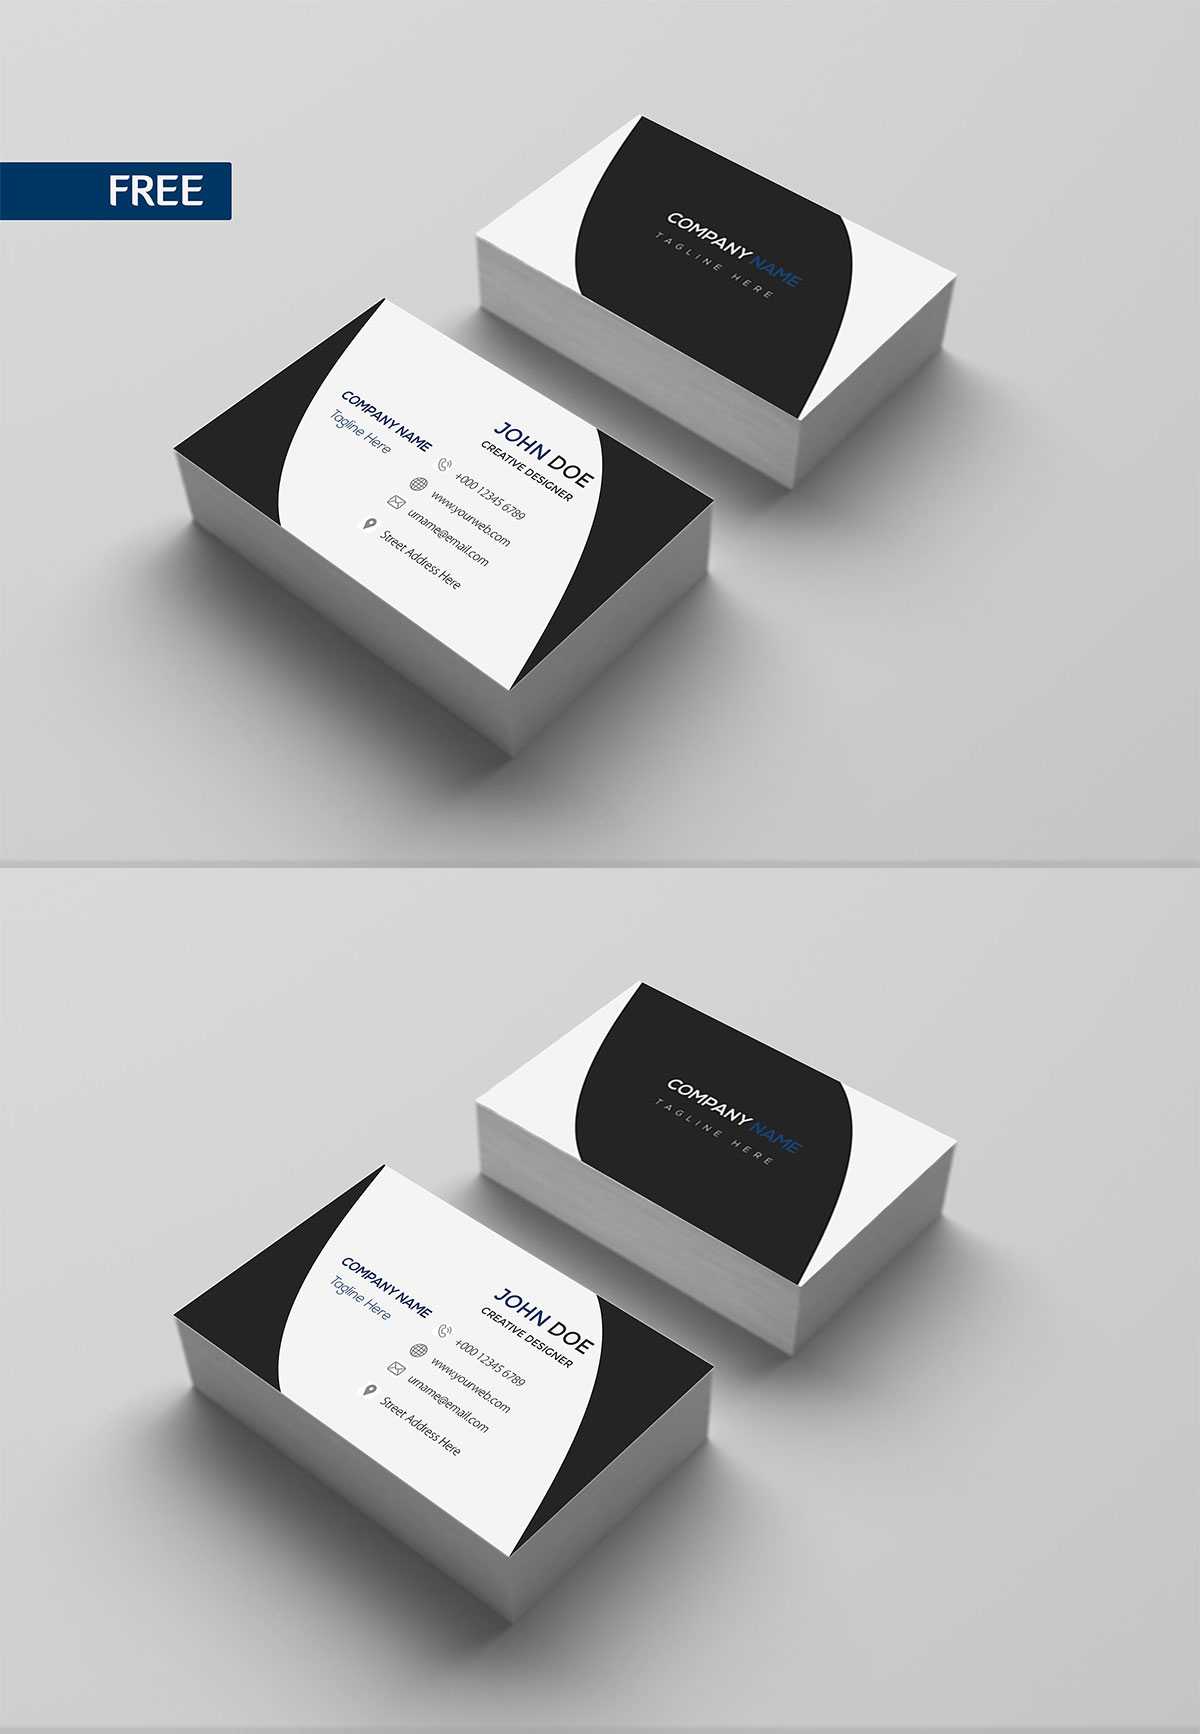 Free Print Design Business Card Template - Creativetacos With Regard To Free Bussiness Card Template